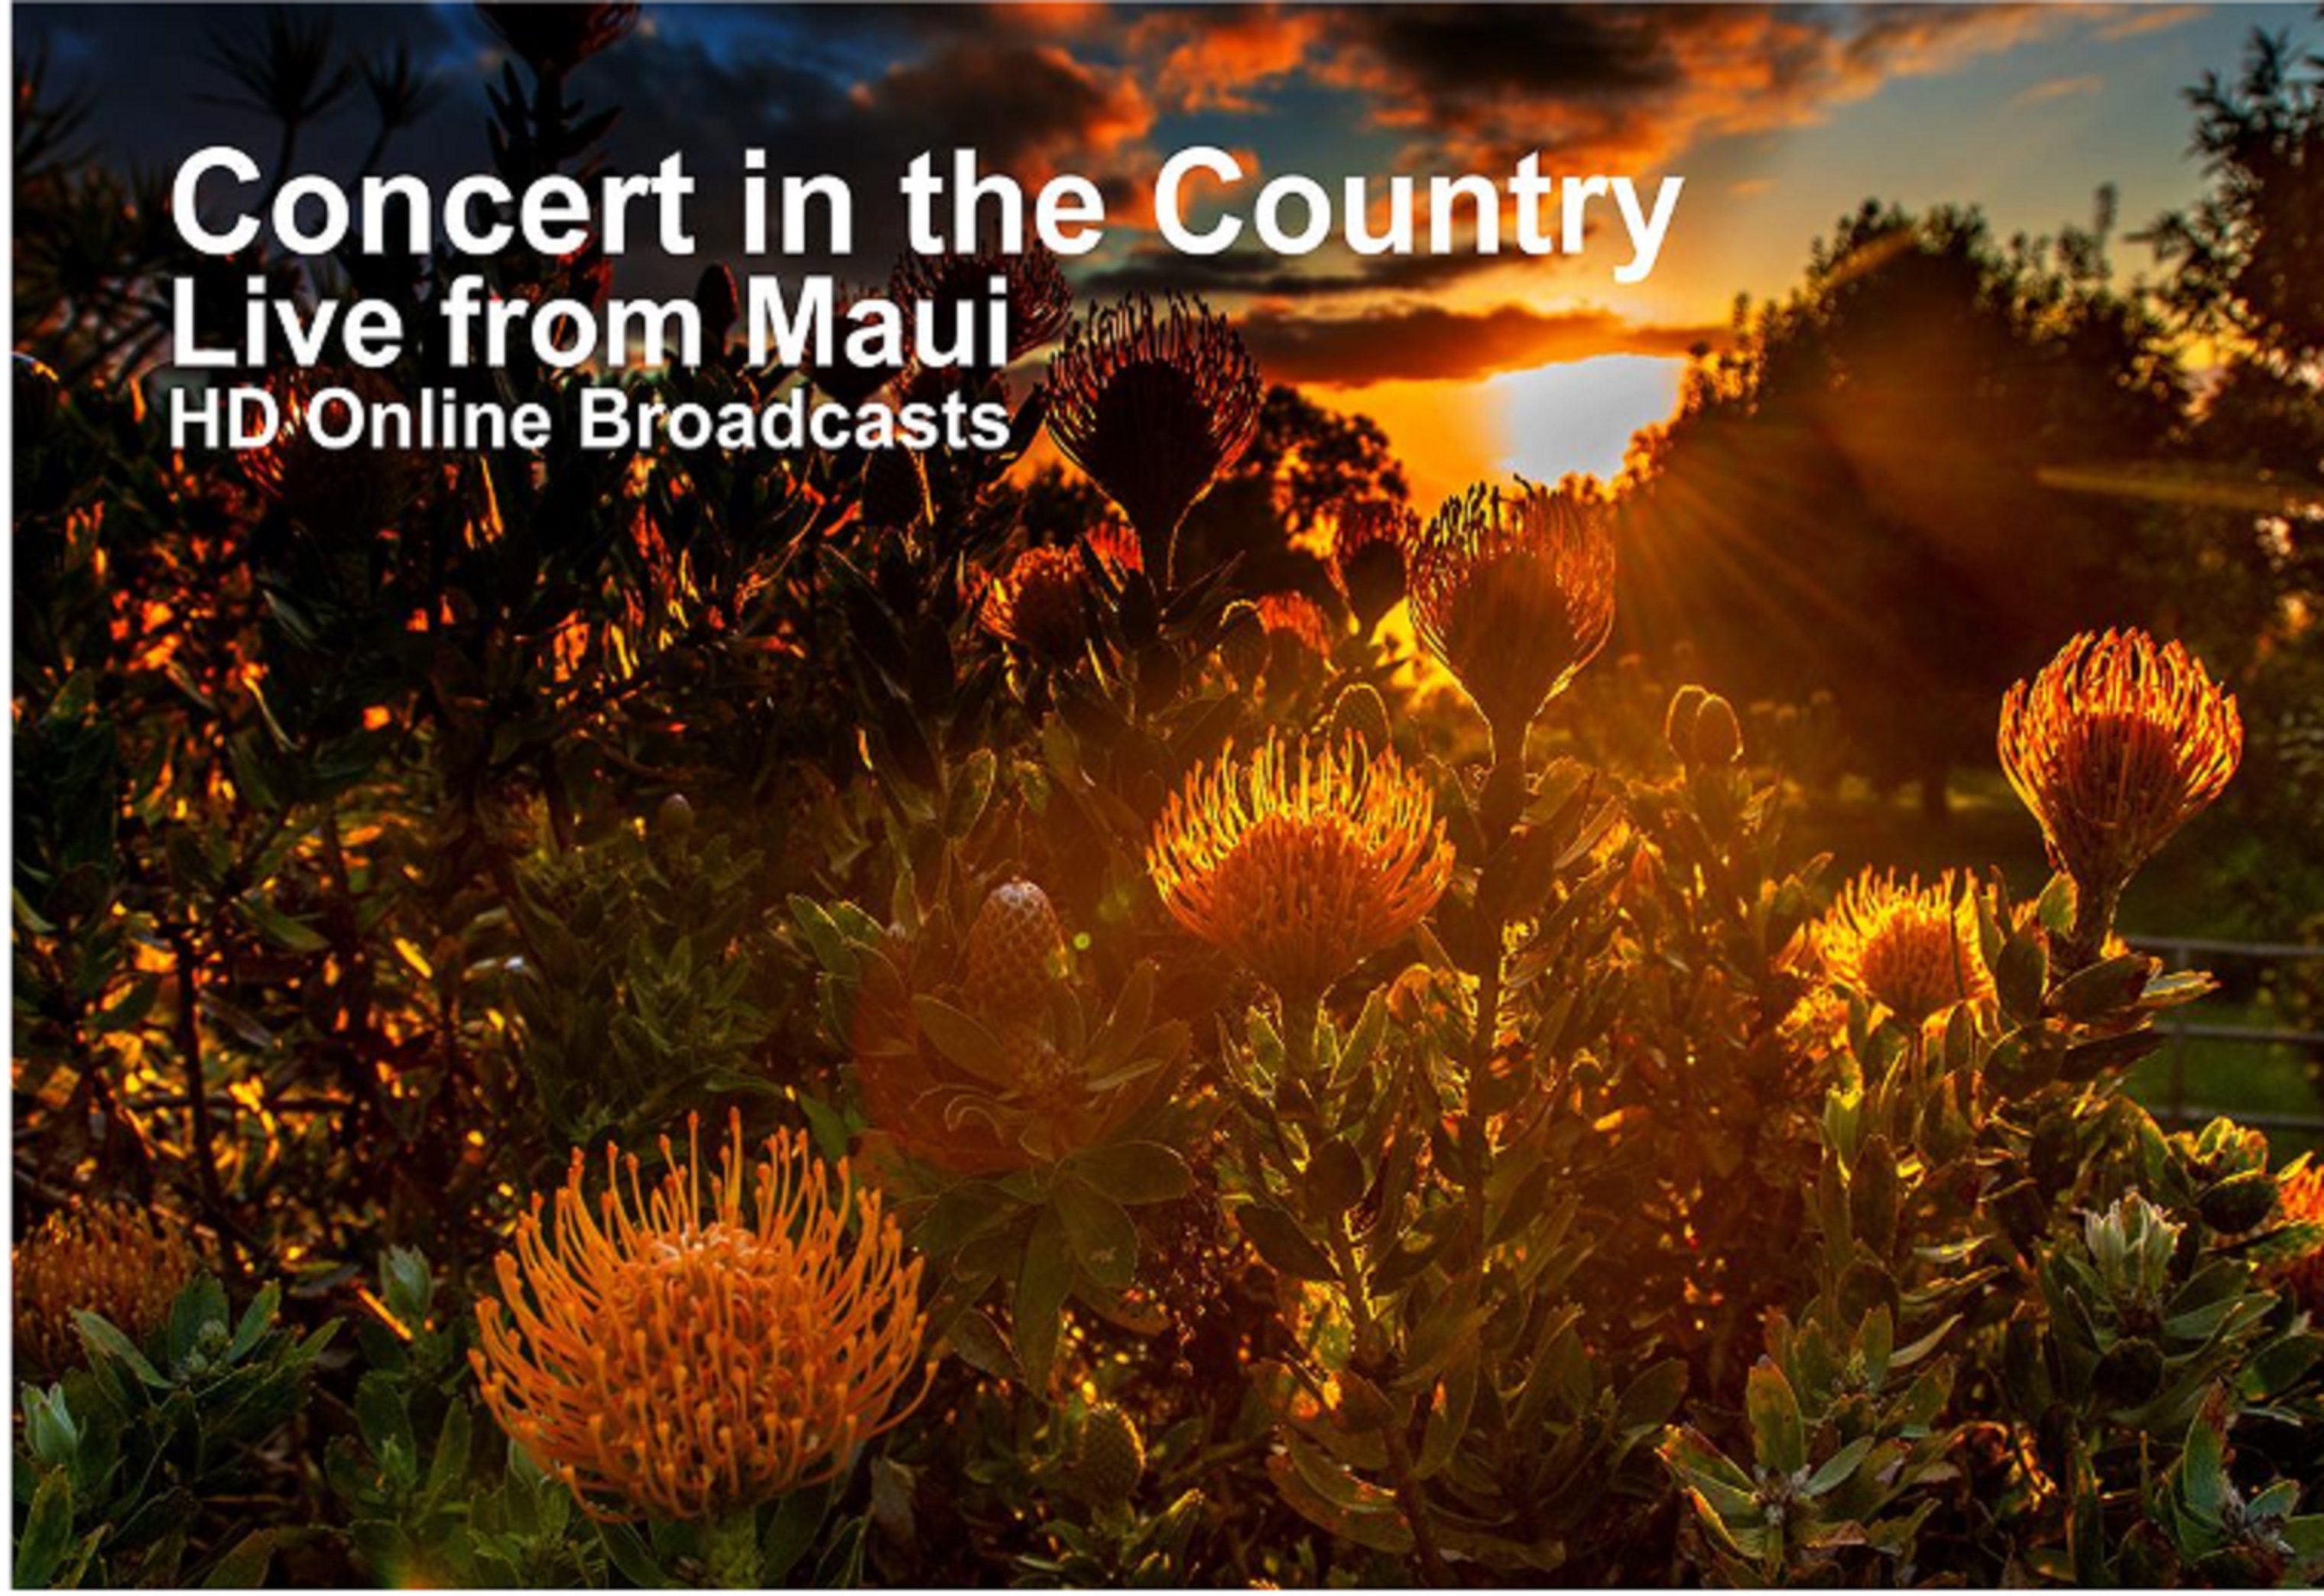 TWO CONCERTS BROADCAST LIVE FROM MAUI FEATURING A GRAMMY AWARD-WINNING HAWAIIAN LEGEND AND A RISING STAR